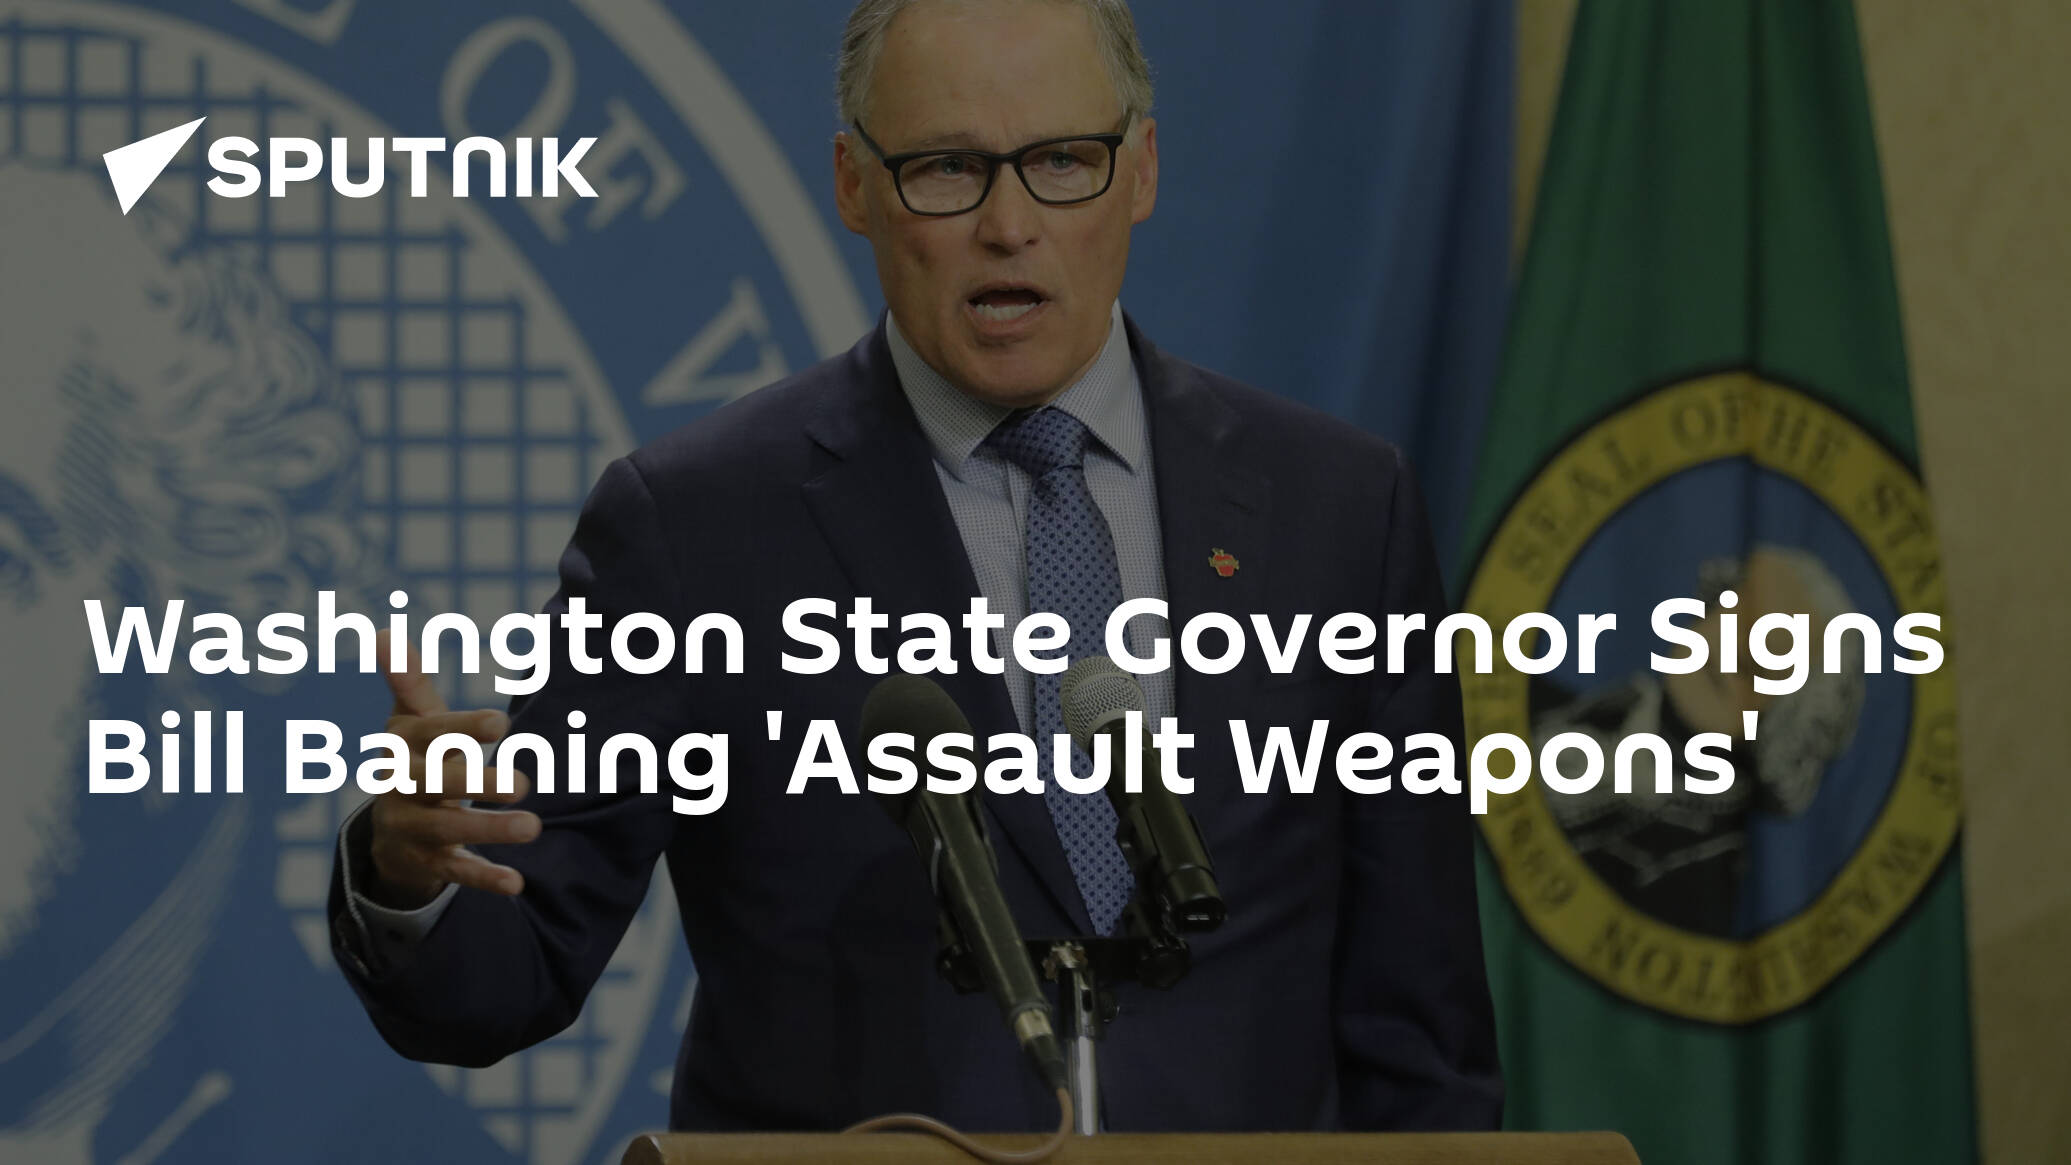 Washington State Governor Signs Bill Banning 'Assault Weapons'